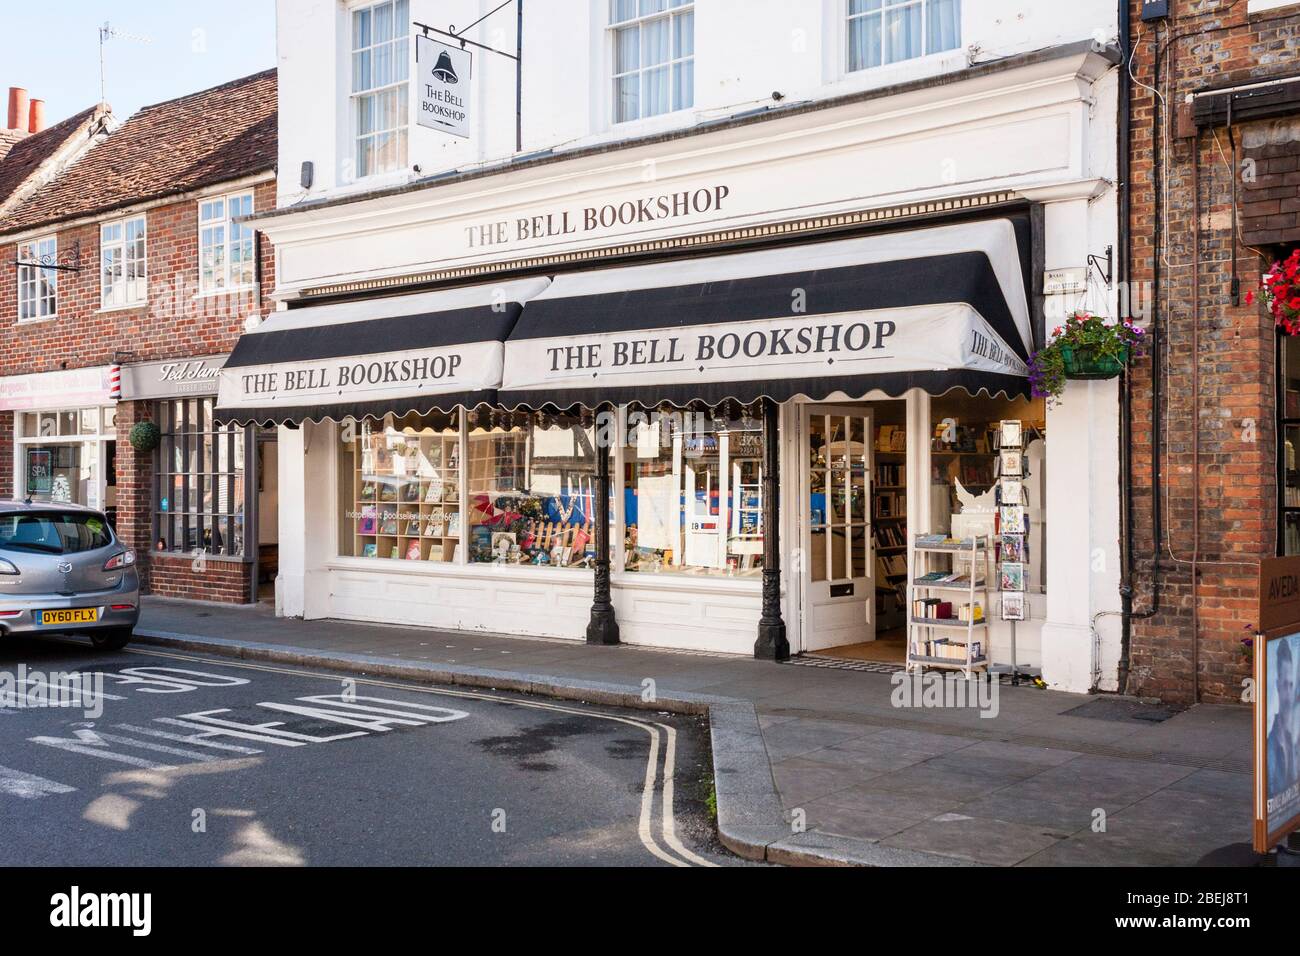 Librairie Bell, Henley-on-Thames, Oxfordshire, Angleterre, GB, Royaume-Uni Banque D'Images